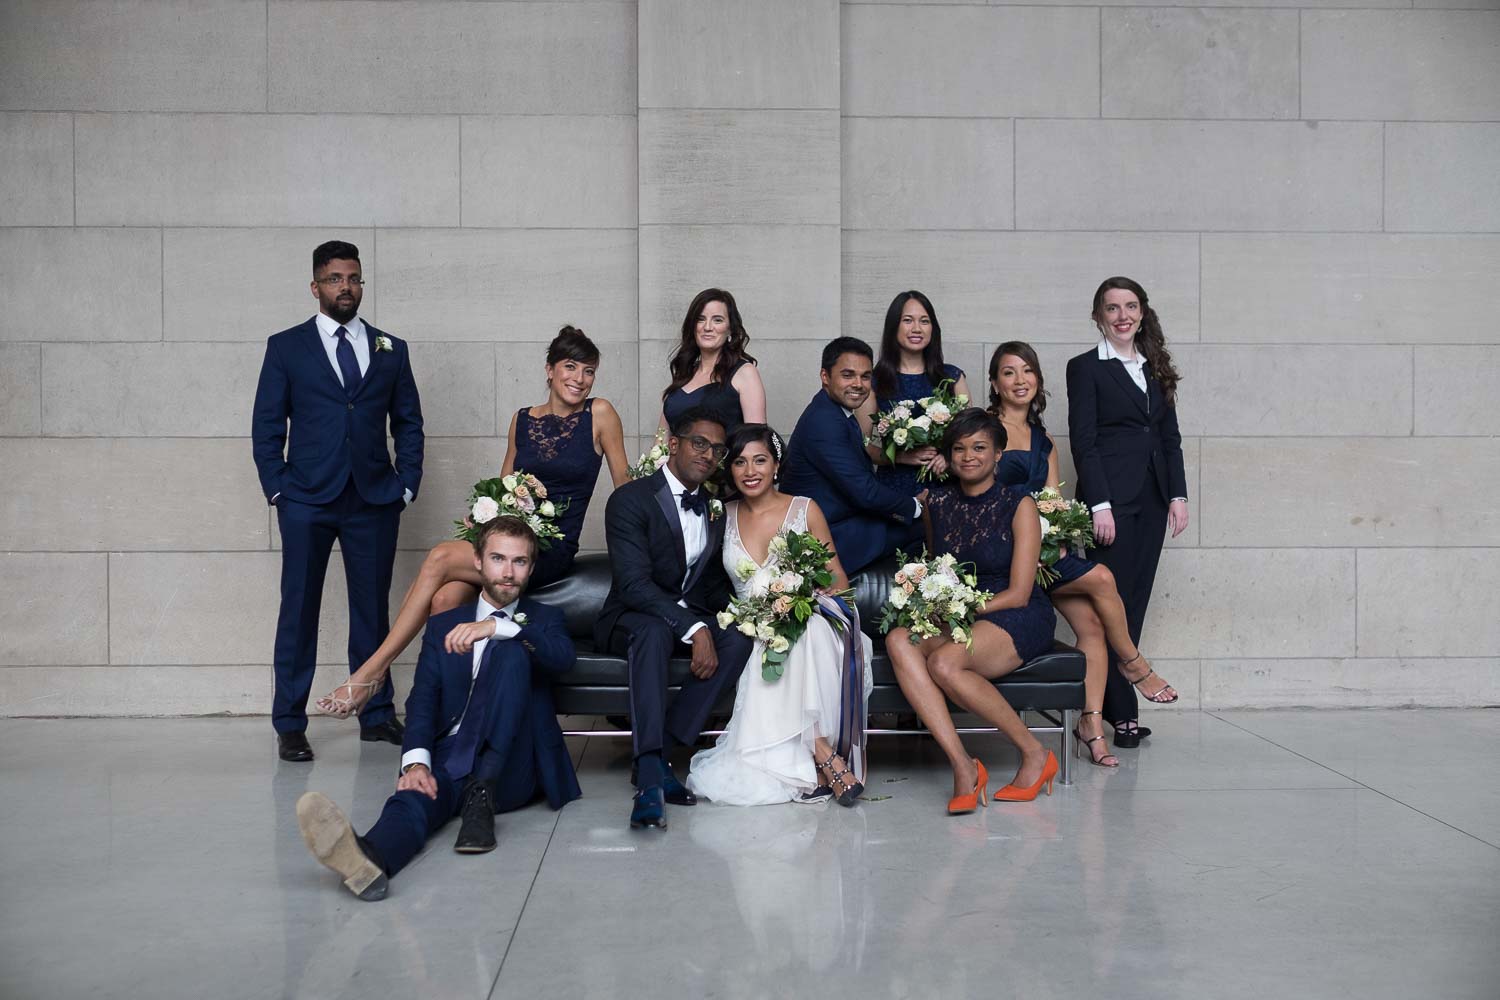  This one is from Najwa + Trevin's wedding at the Art Gallery of Ontario.&nbsp;  I always try to get a casual, relaxed portrait of the wedding party along with a more formal one. 